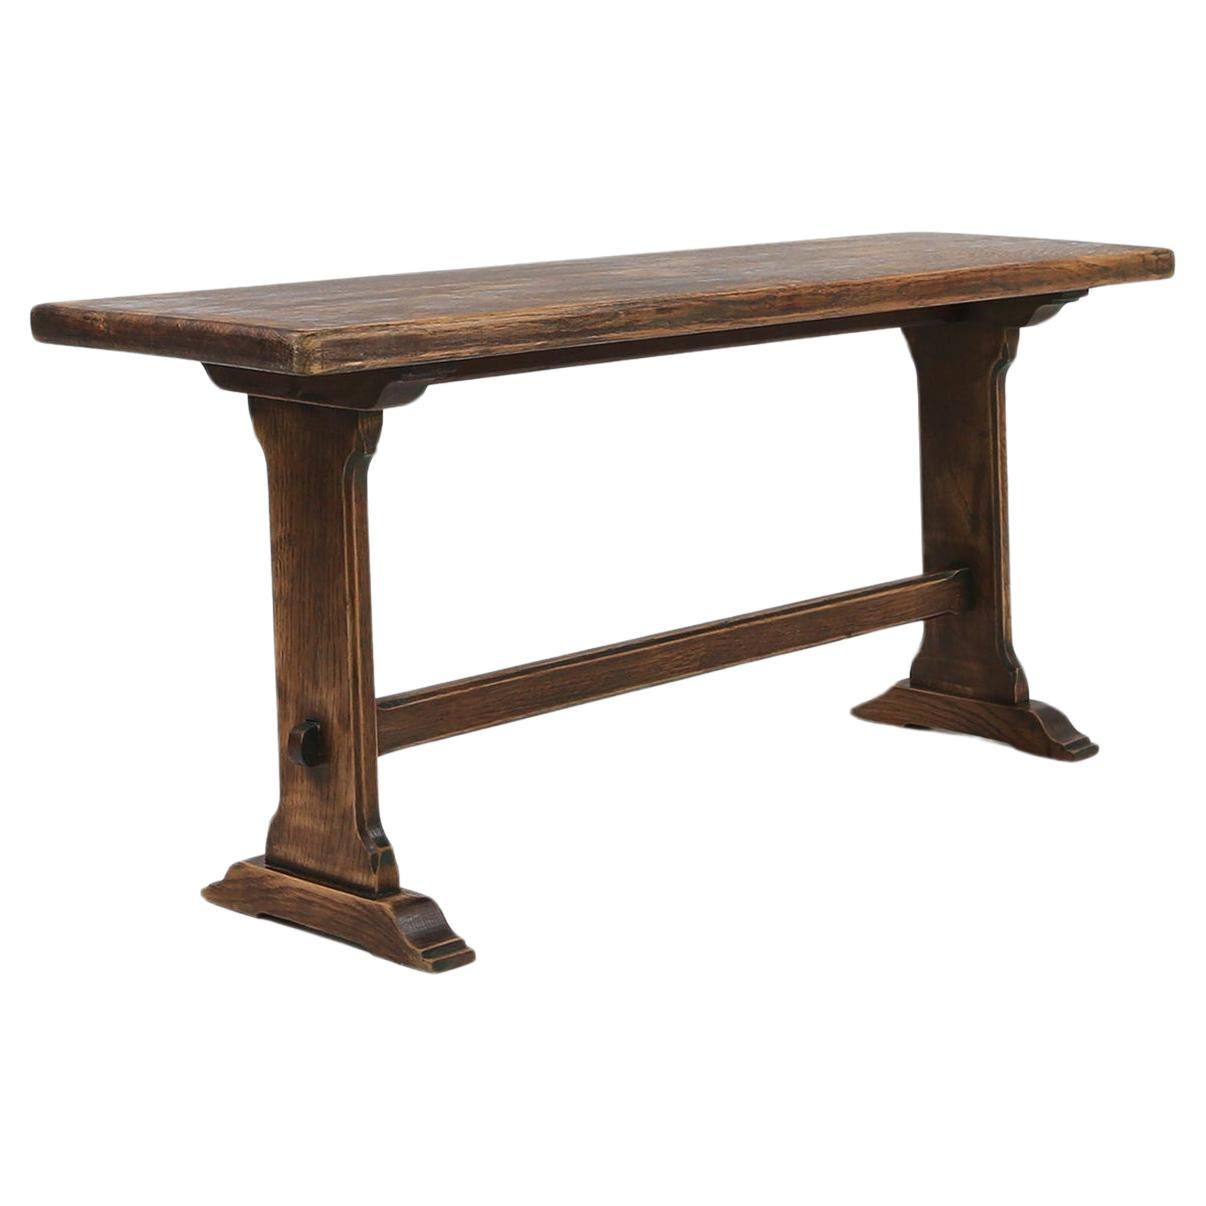 French wooden bench in solid wood, ca 1900